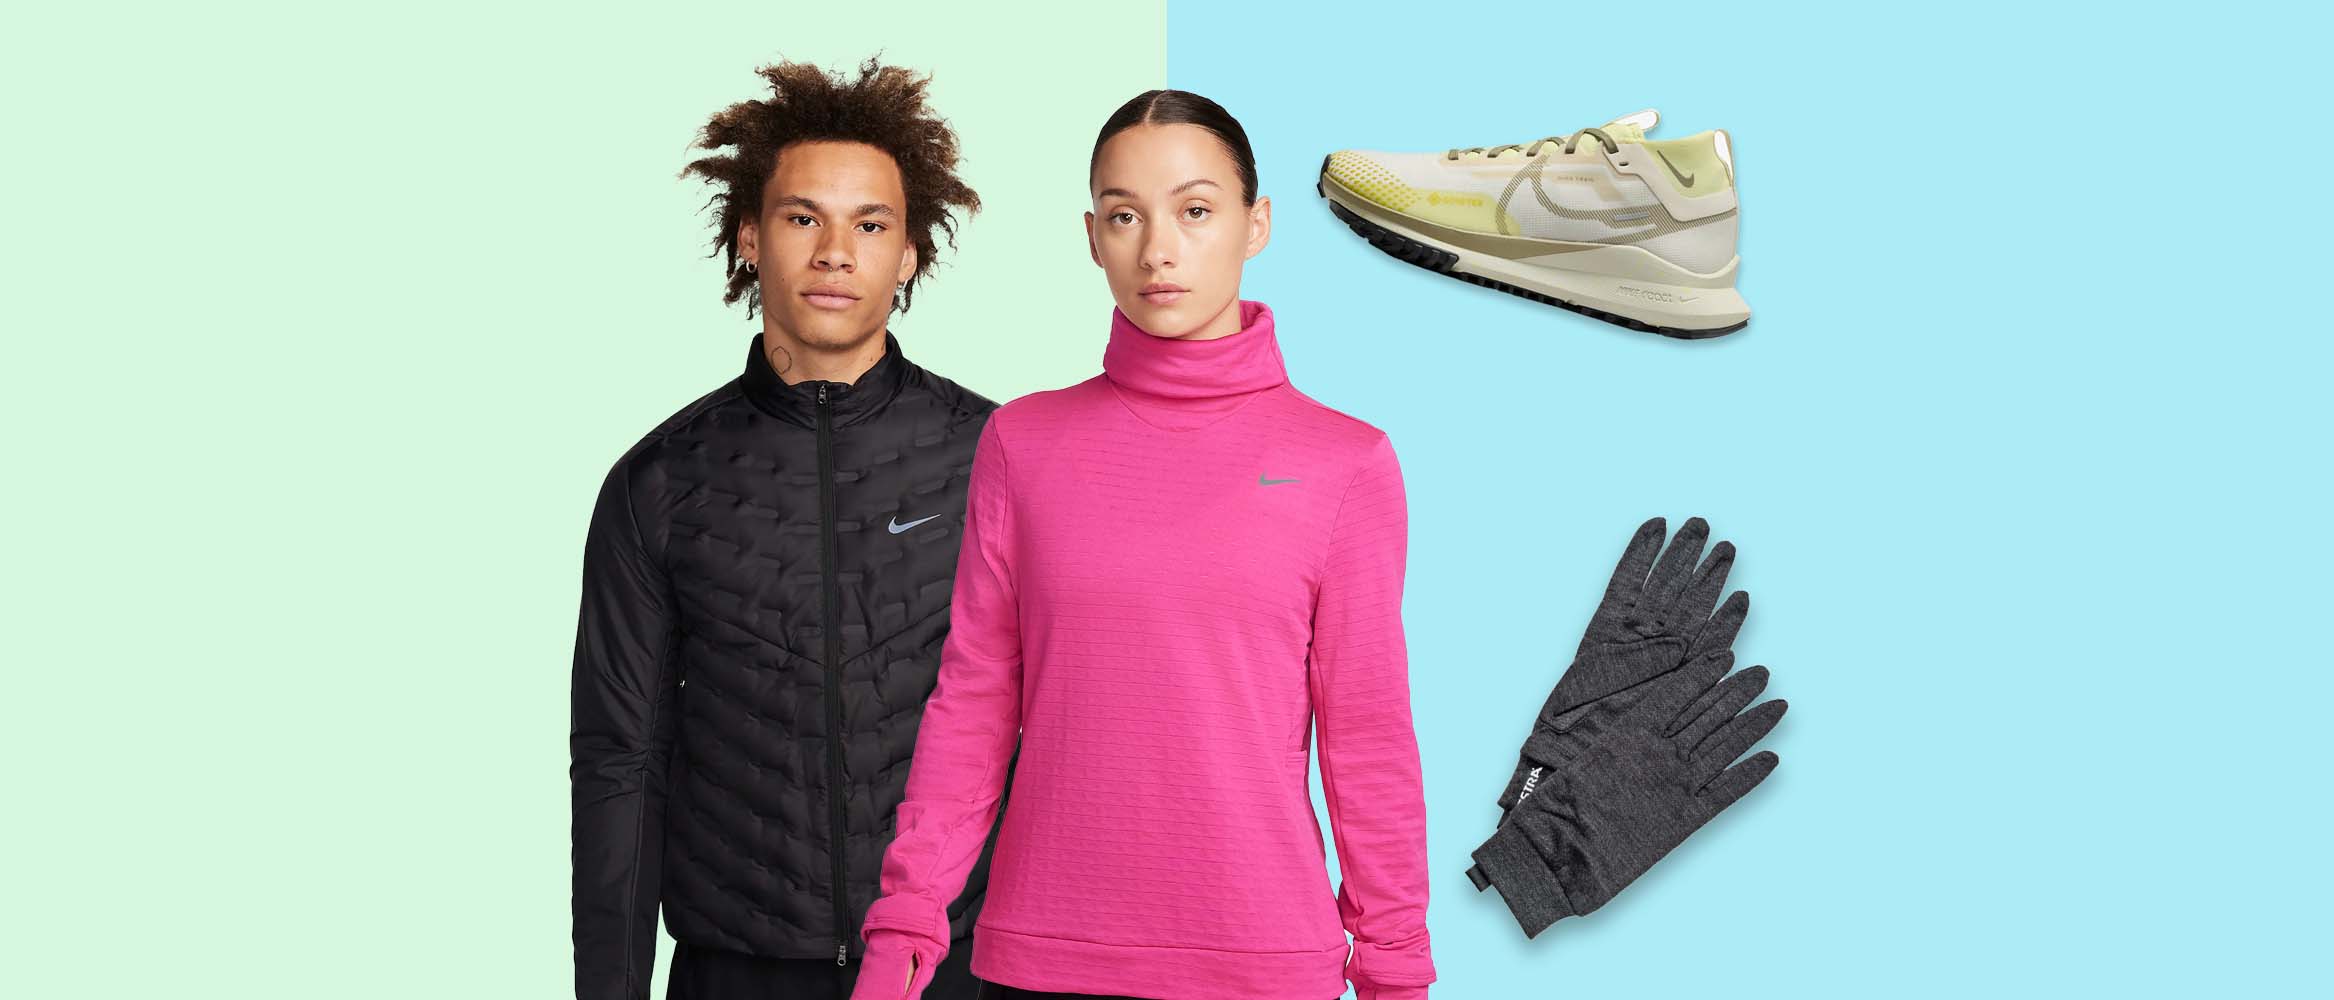 Winter Running Gear Guide: Must Haves to Enjoy the Season